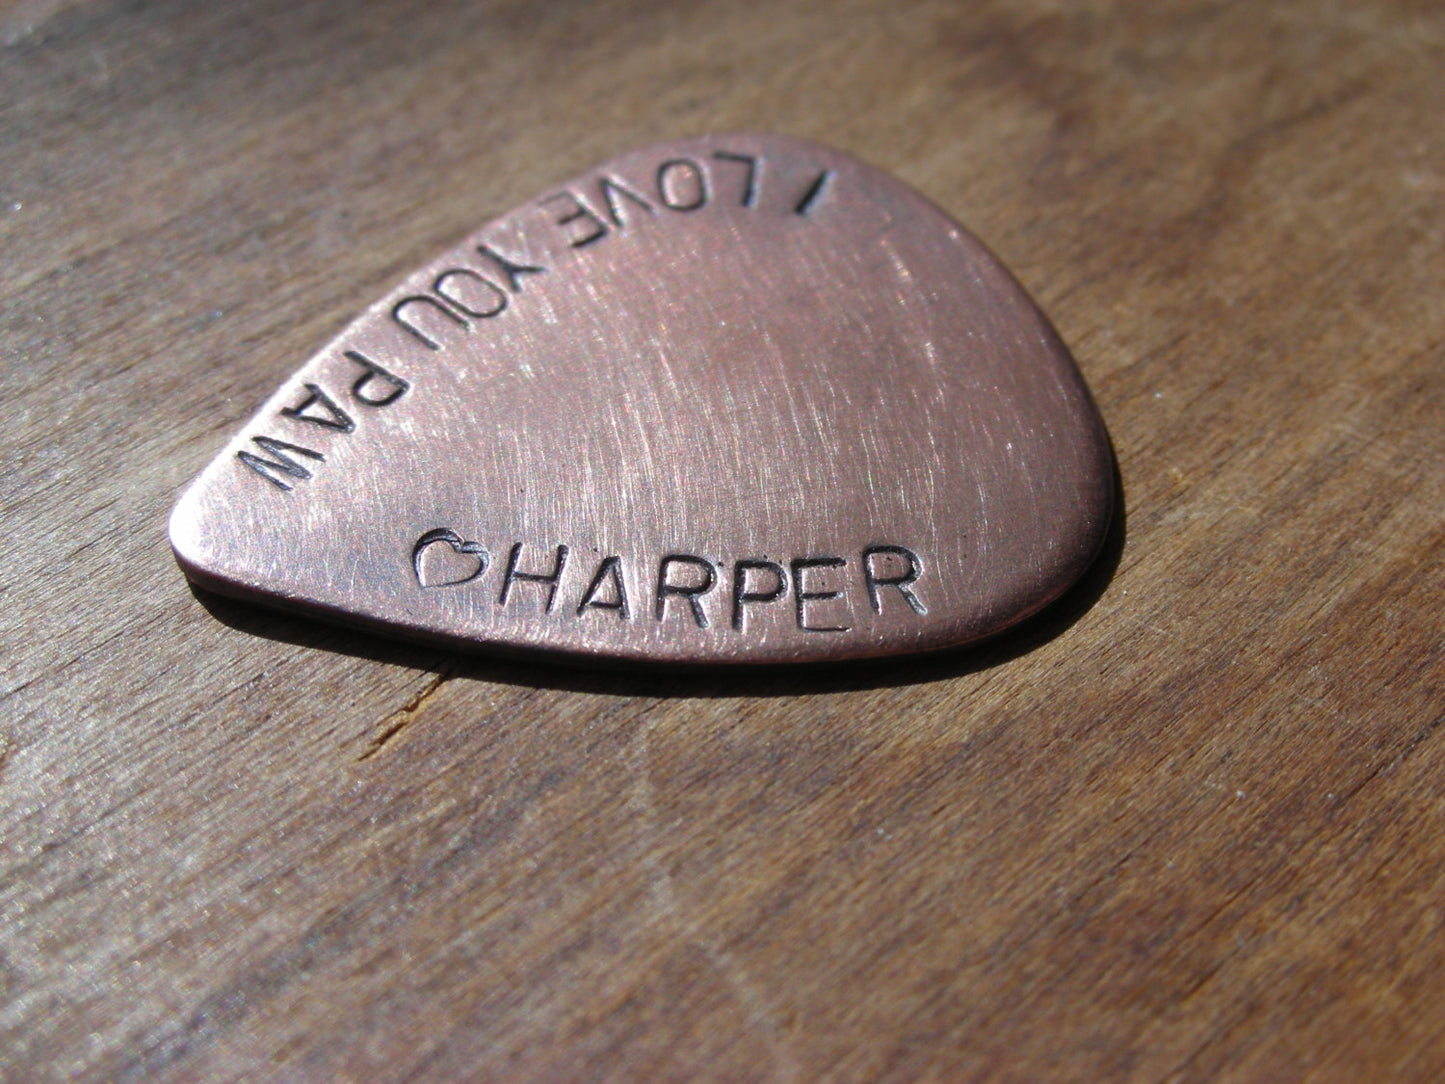 FATHERS DAY GUITAR Pick--Handstamped Copper-Great Gift for Fathers Day, Husband, Boyfriend, Dad, Groomsmen